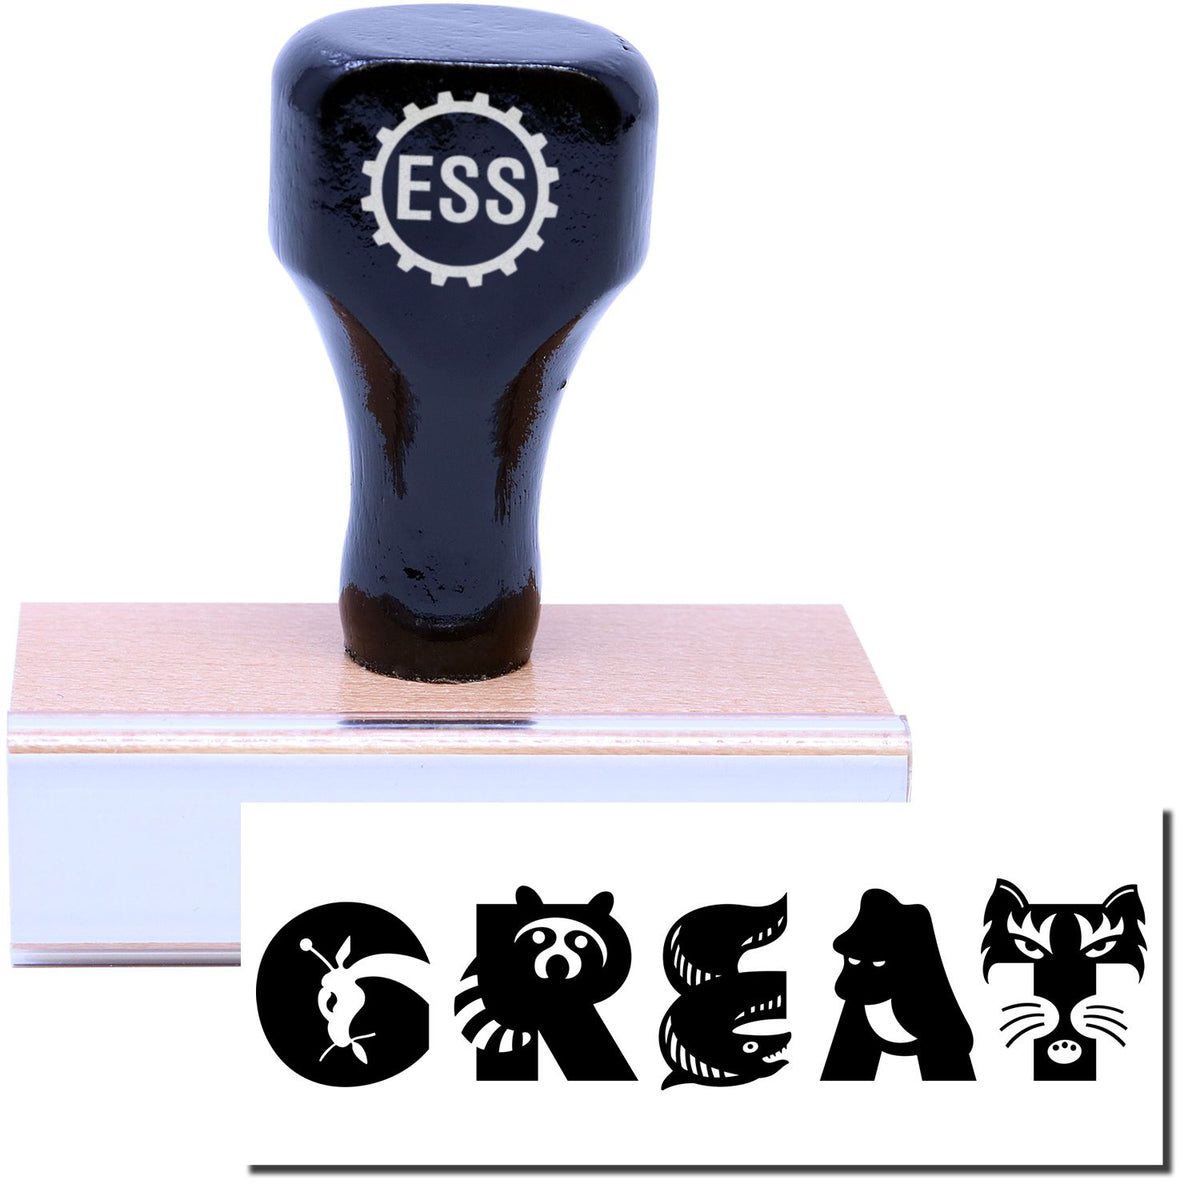 A stock office rubber stamp with a stamped image showing how the word &quot;GREAT&quot; (Each letter is created to resemble an animal, including a giraffe, raccoon, eel, ape, and tiger) in a large font is displayed after stamping.